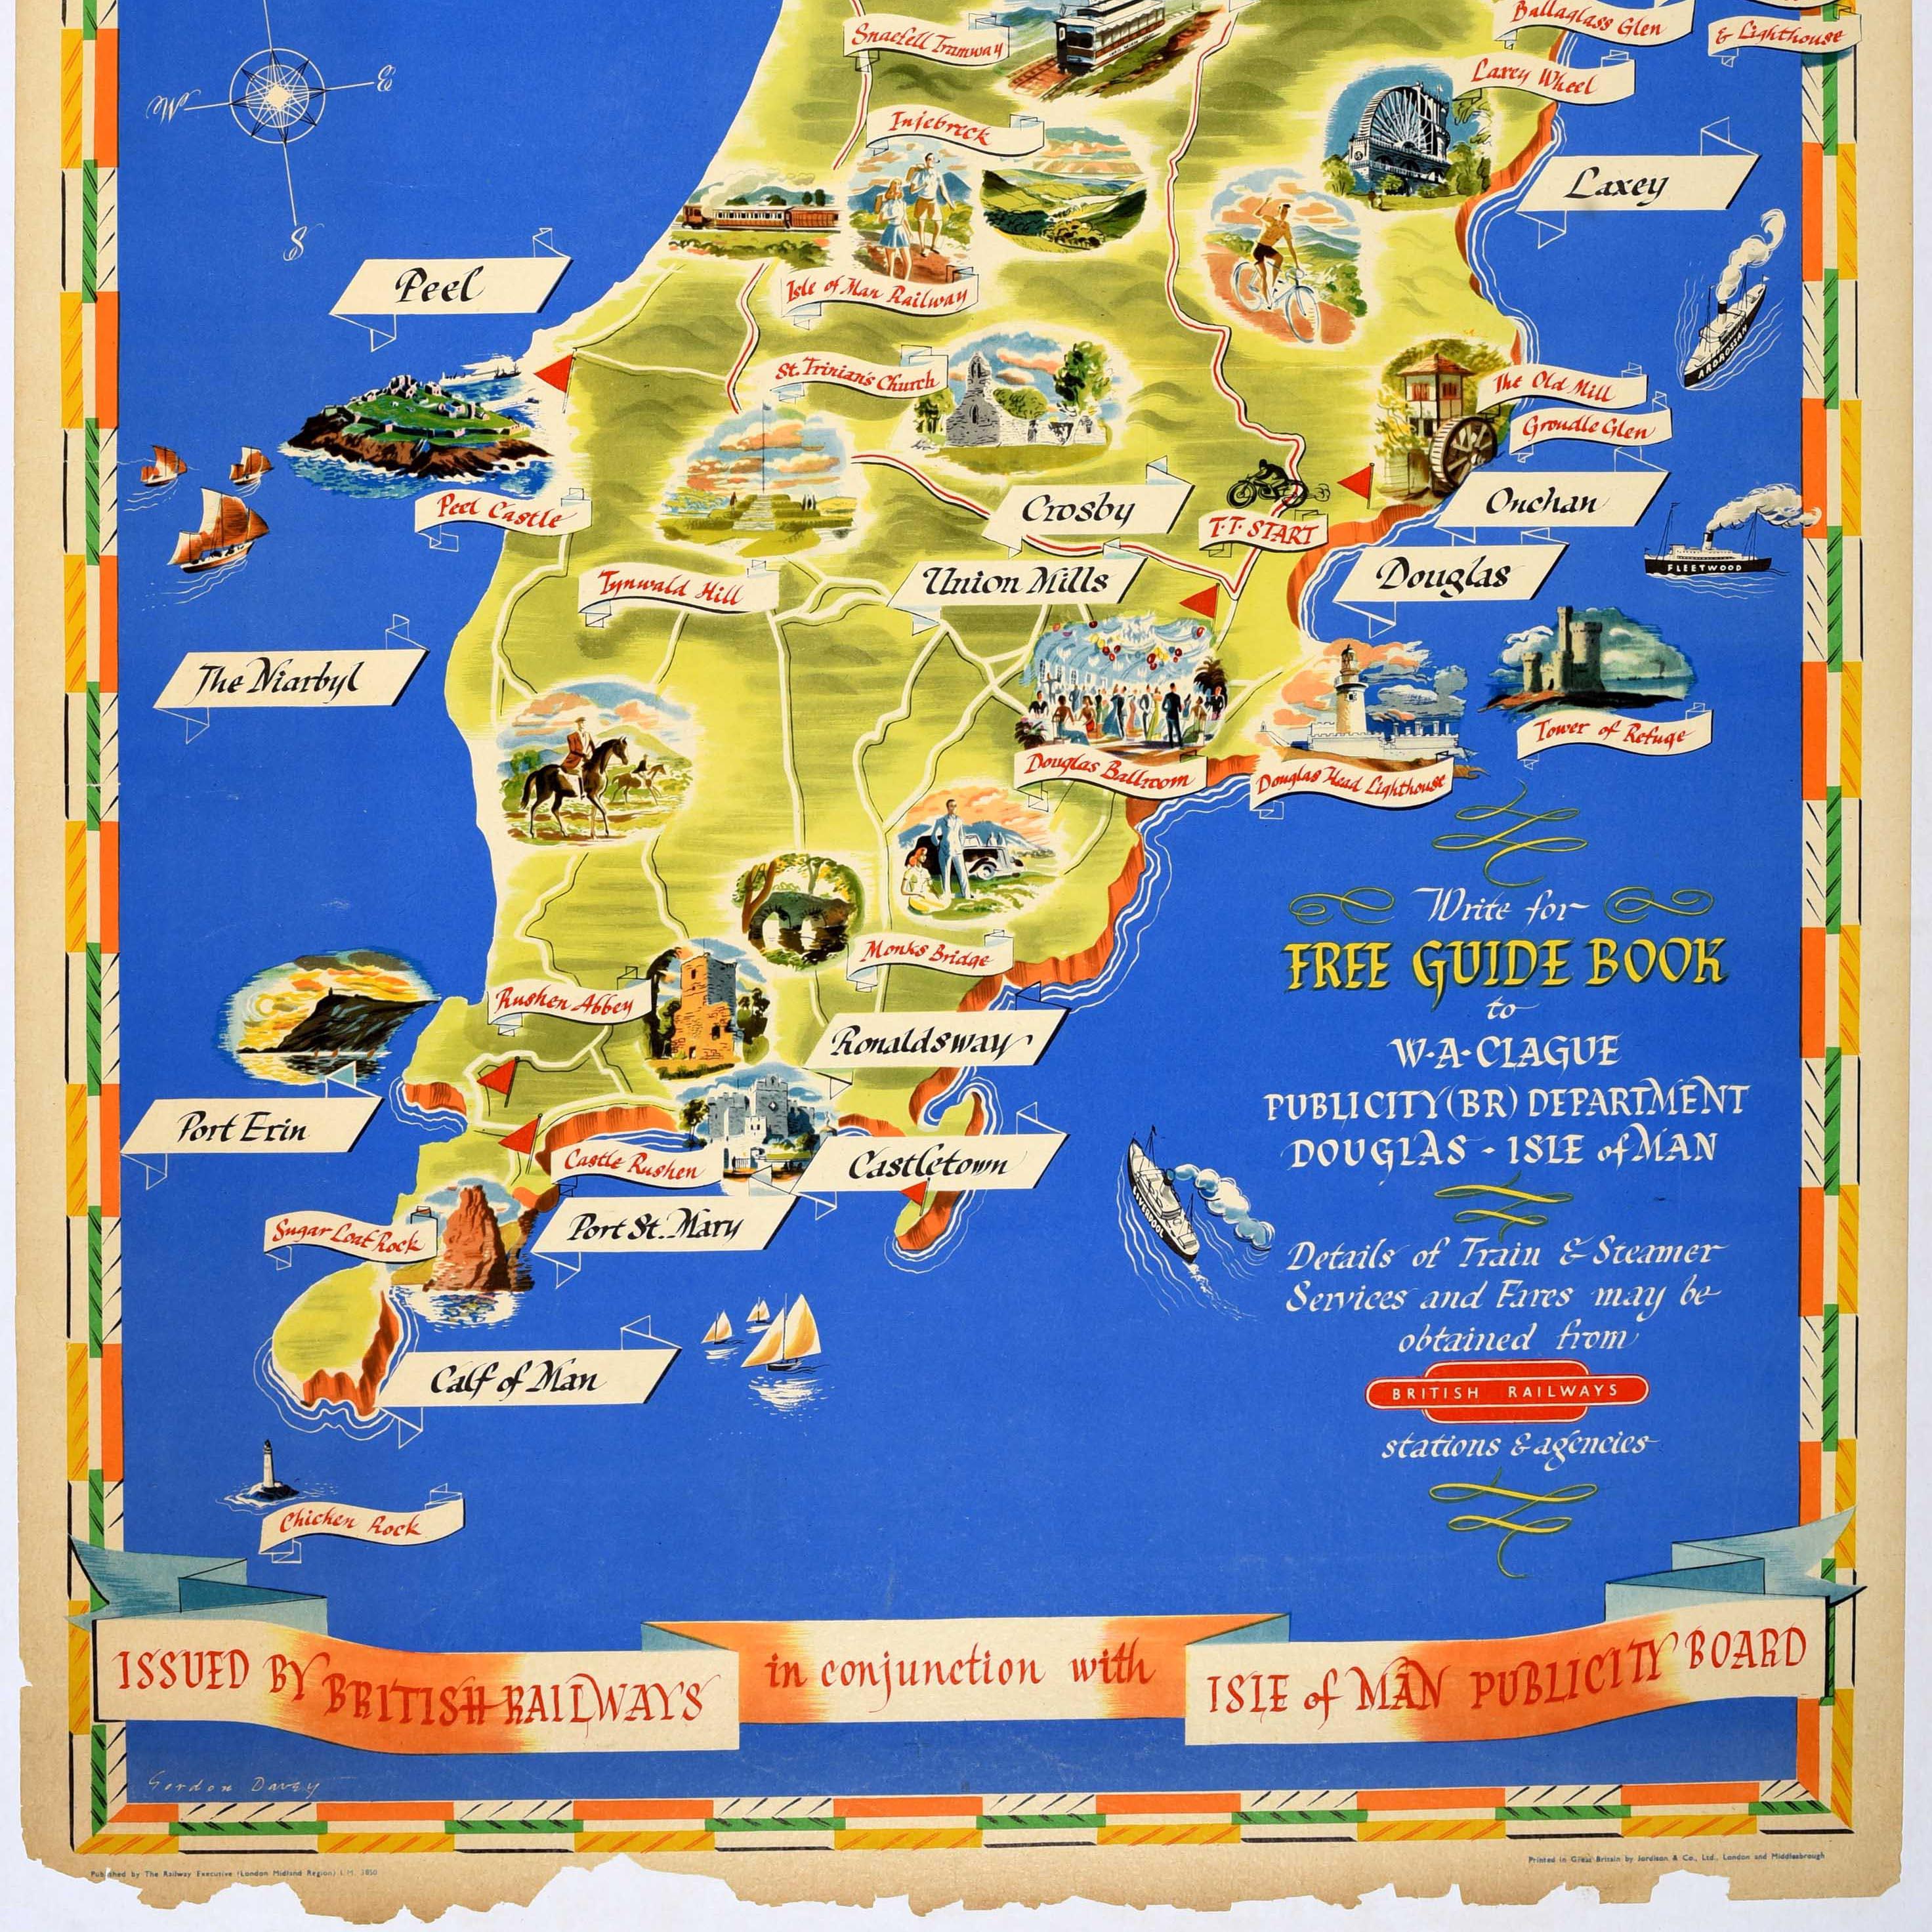 Original vintage travel map poster for the Isle of Man issued by British Railways in conjunction with Isle of Man Publicity Board featuring a pictorial map annotated with names of towns and illustrations of local points of interest including the